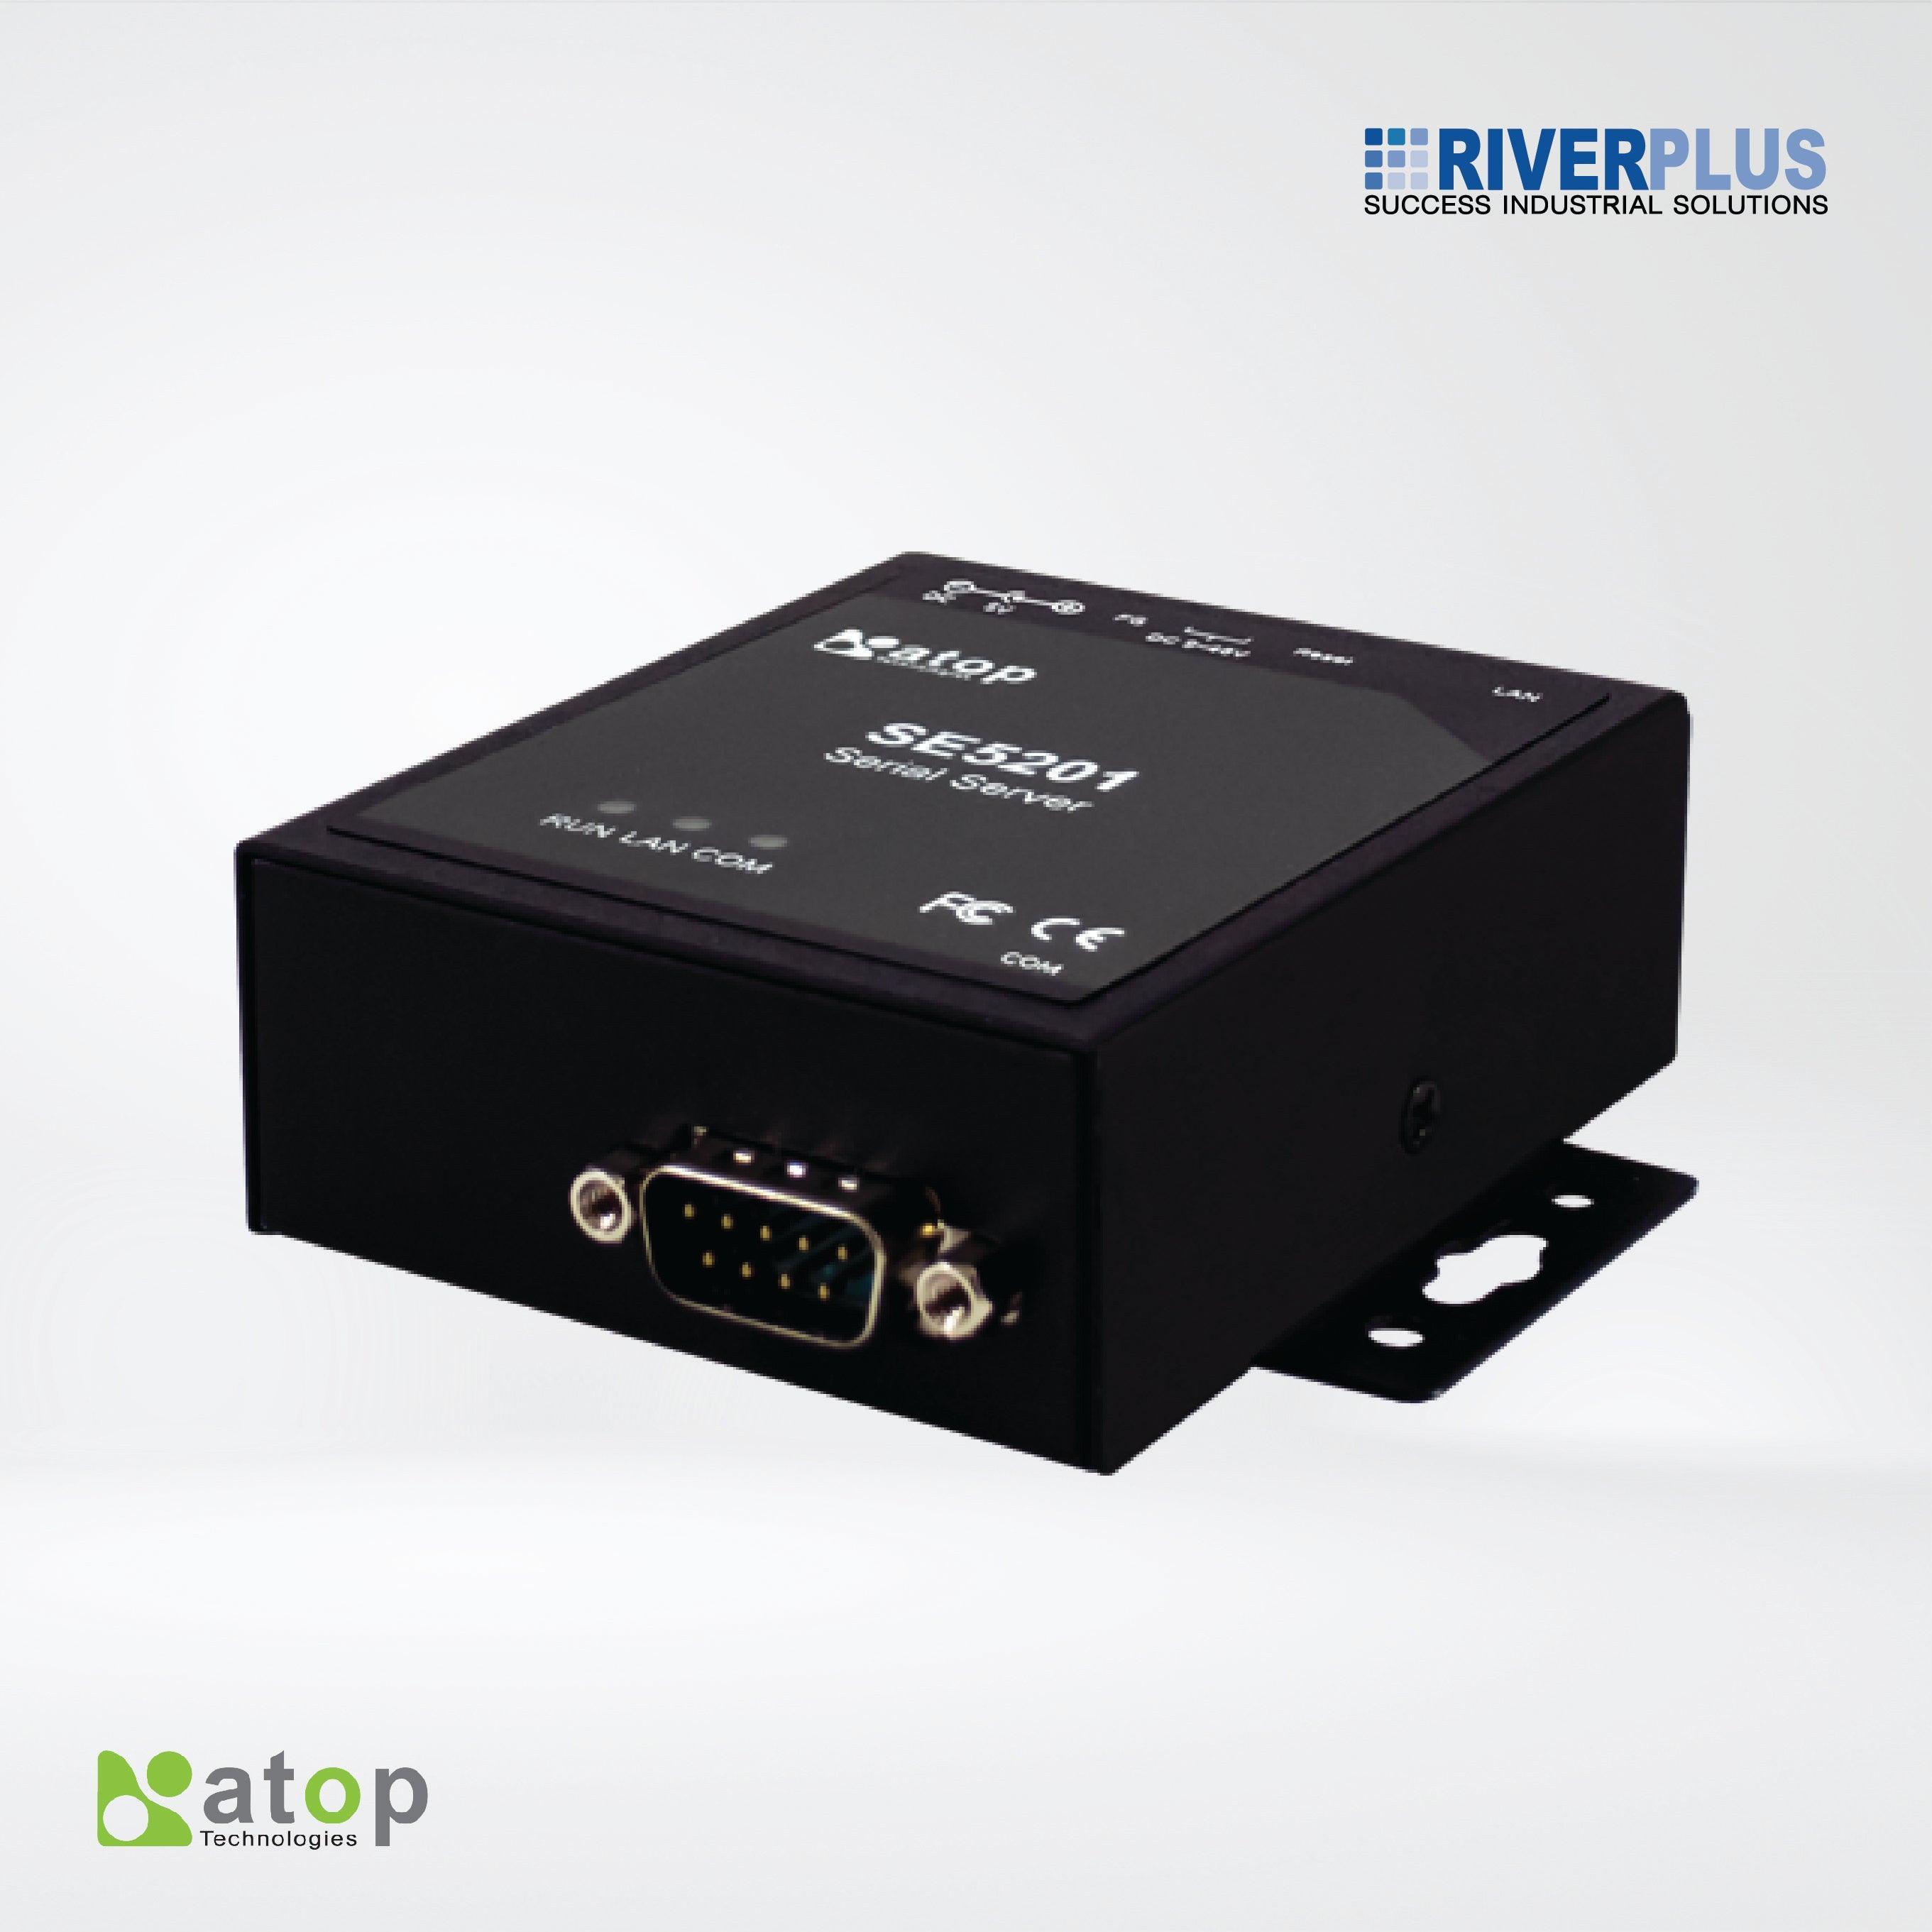 SE5201-DB Compact Industrial Field-Mount Serial Device Server - Riverplus